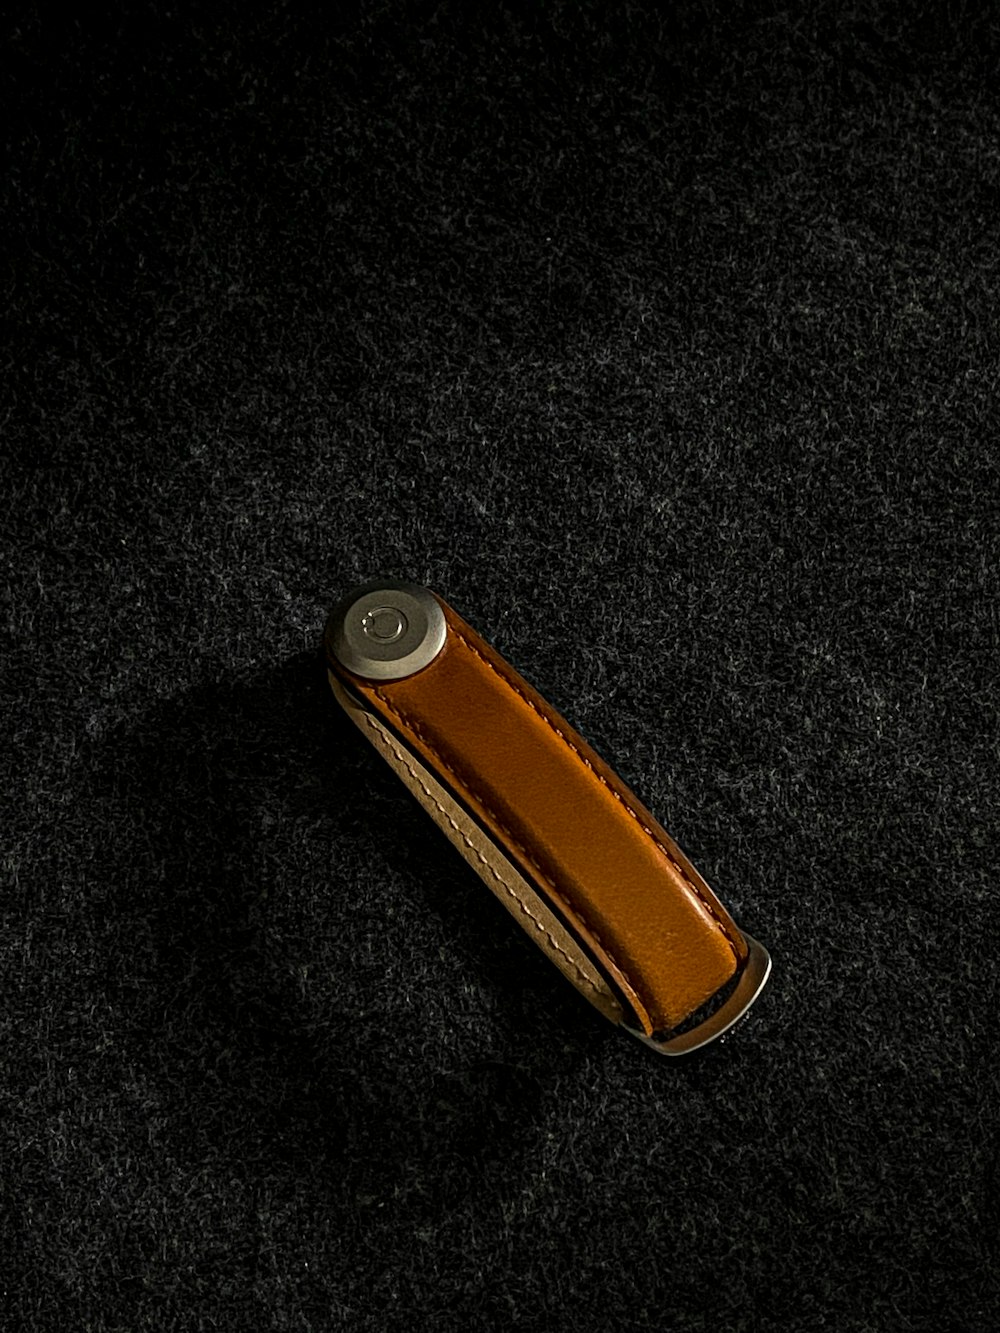 a lighter is laying on a black surface